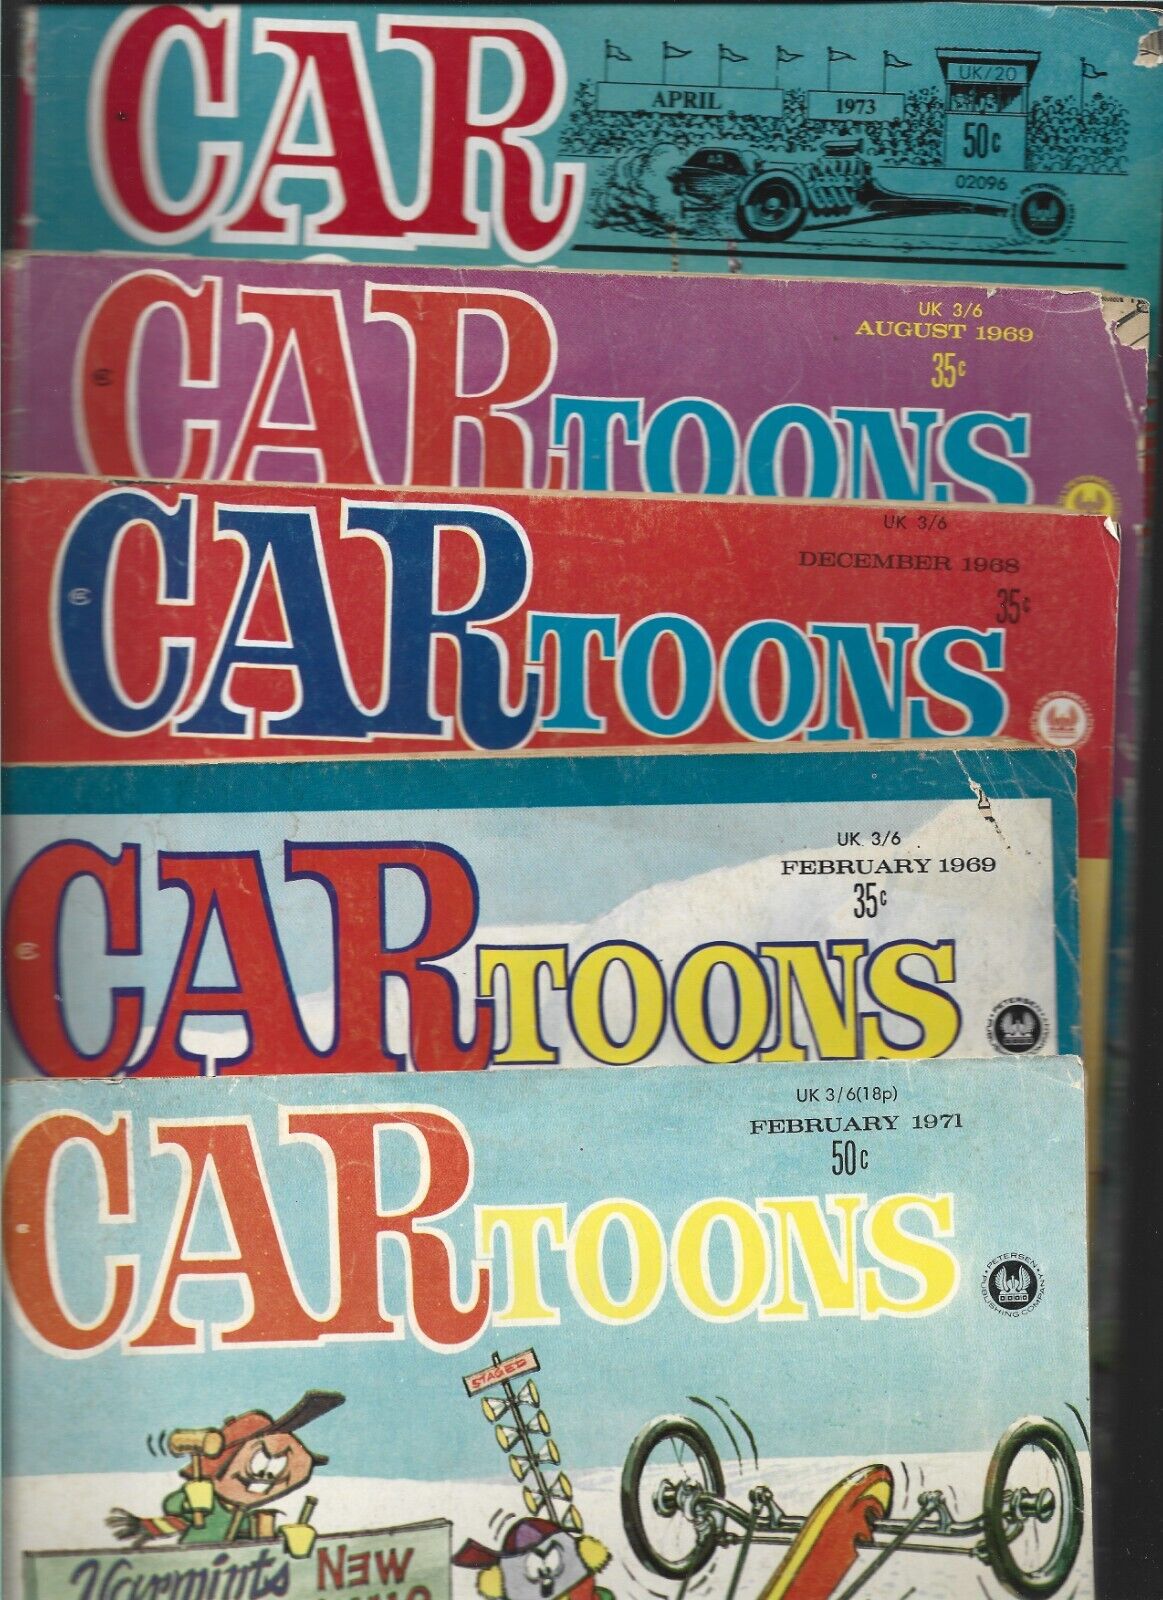 CARtoons magazine 5 issue lot / UNLIMITED SHIPPING $4.99